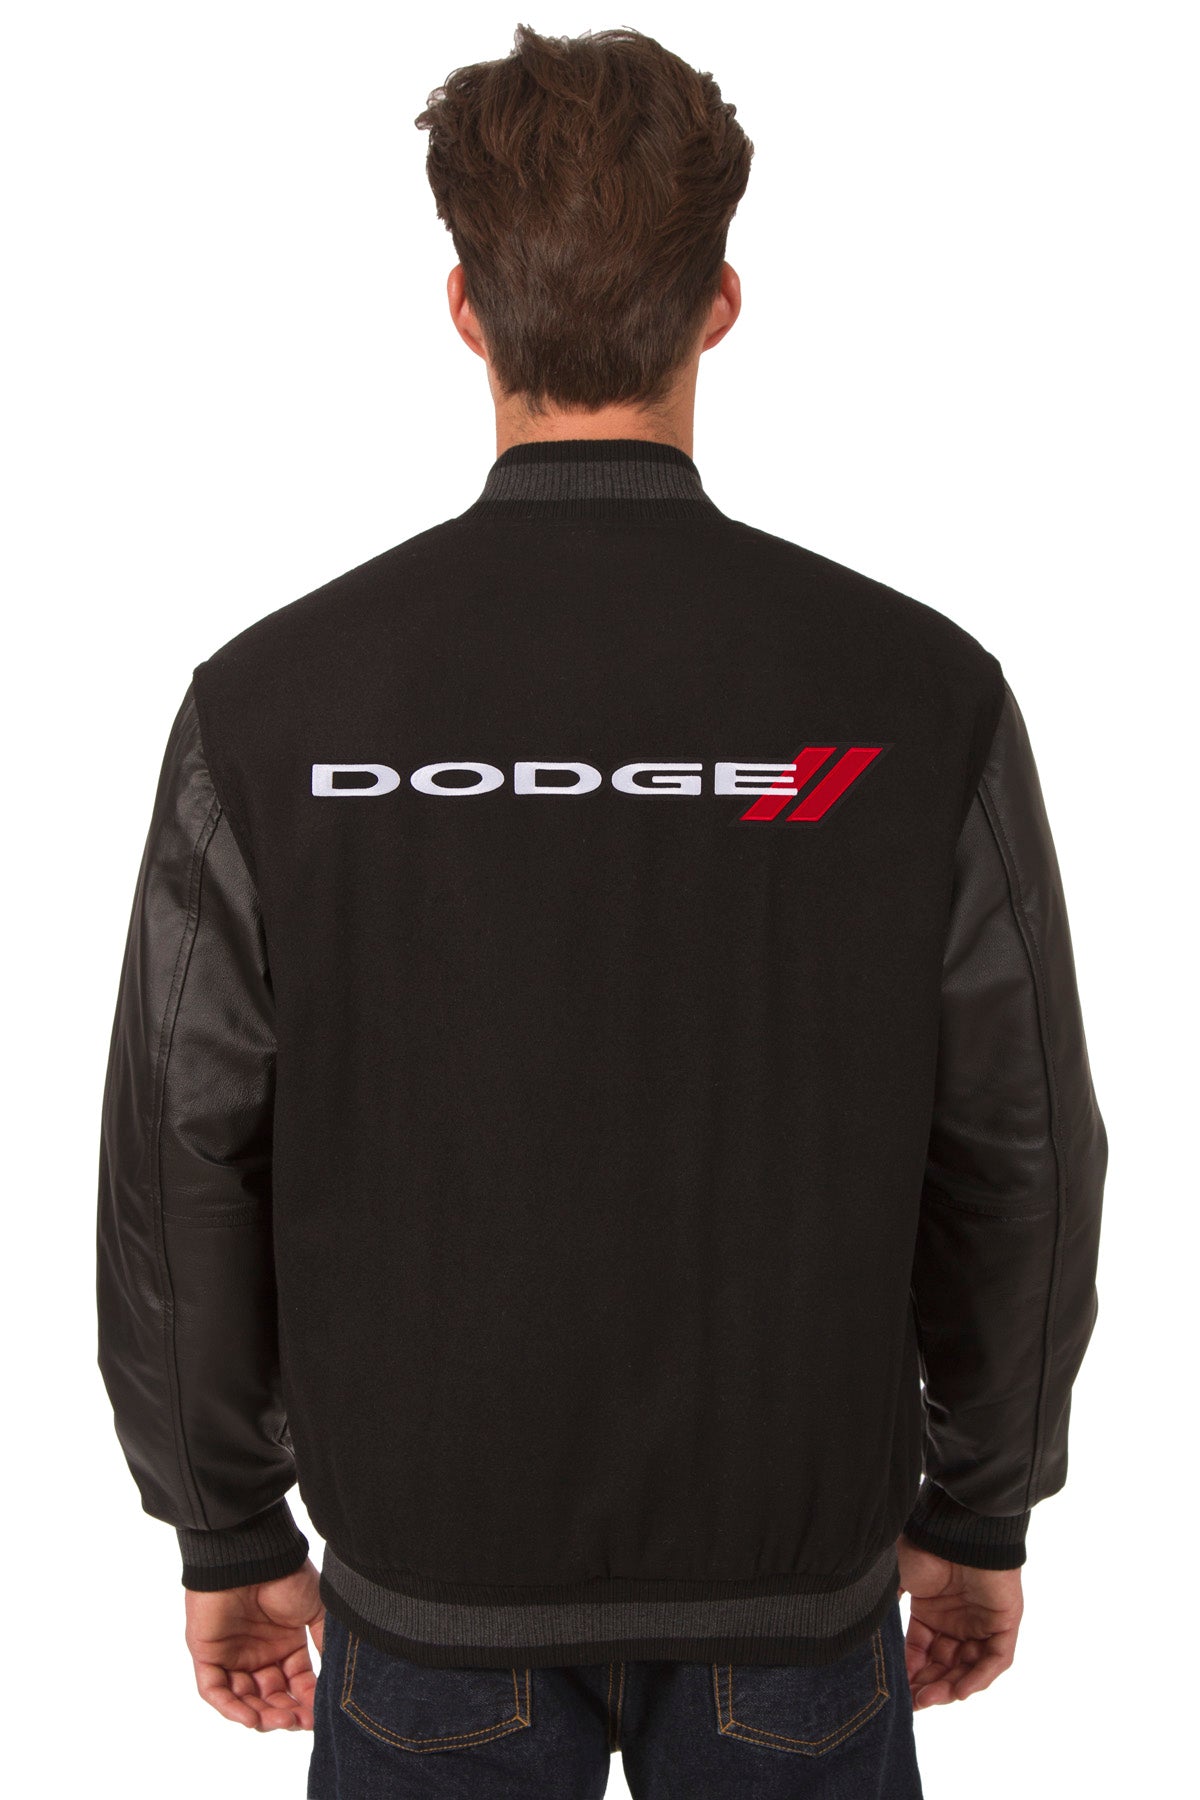 Dodge Reversible Wool and Leather Jacket